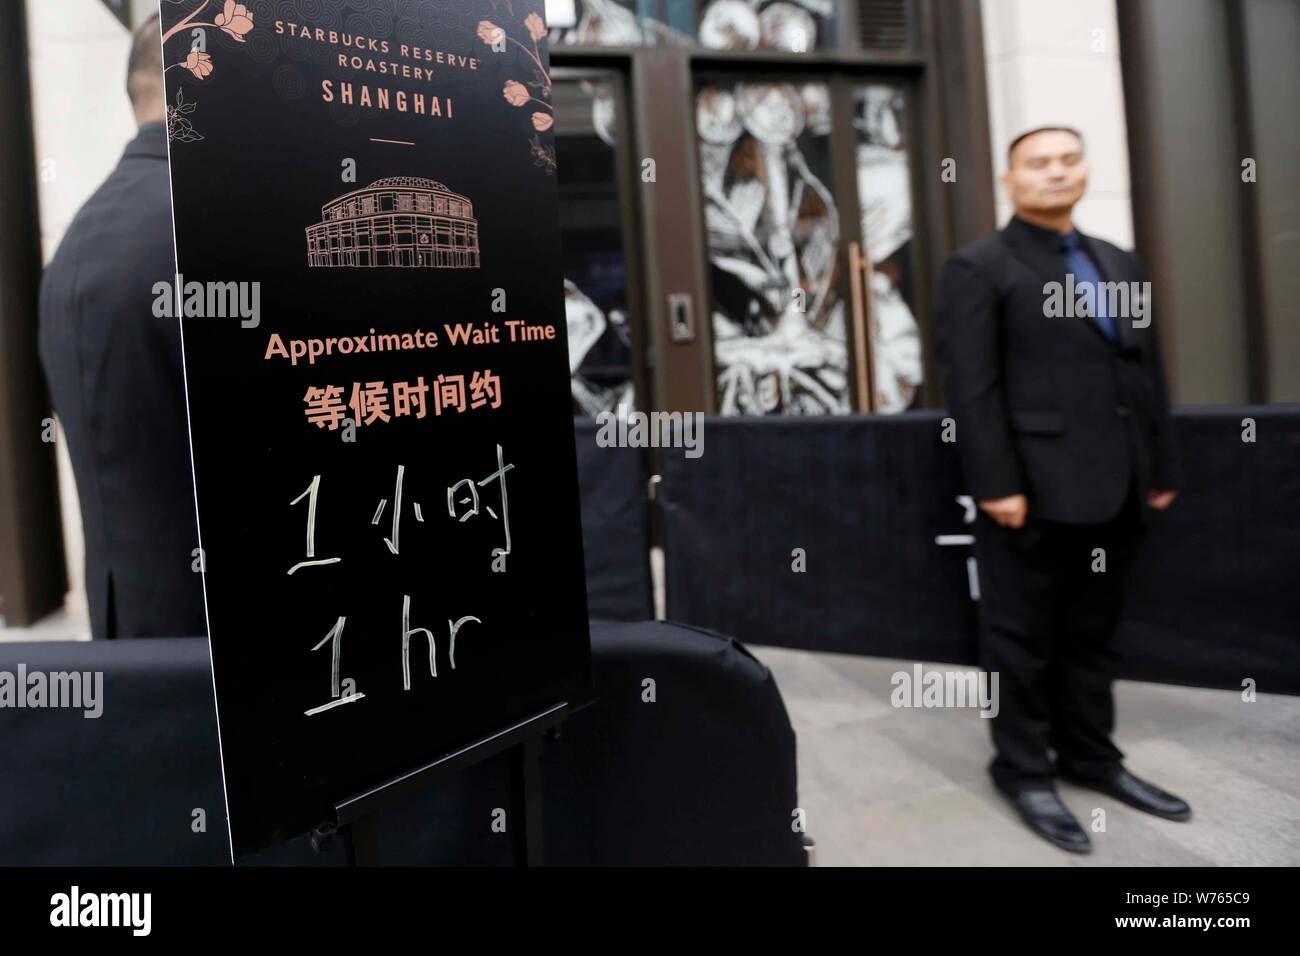 A security guard stands next to a signboard showing approximate waiting time outside the world's largest Starbucks Reserve Roastery in Shanghai, China Stock Photo